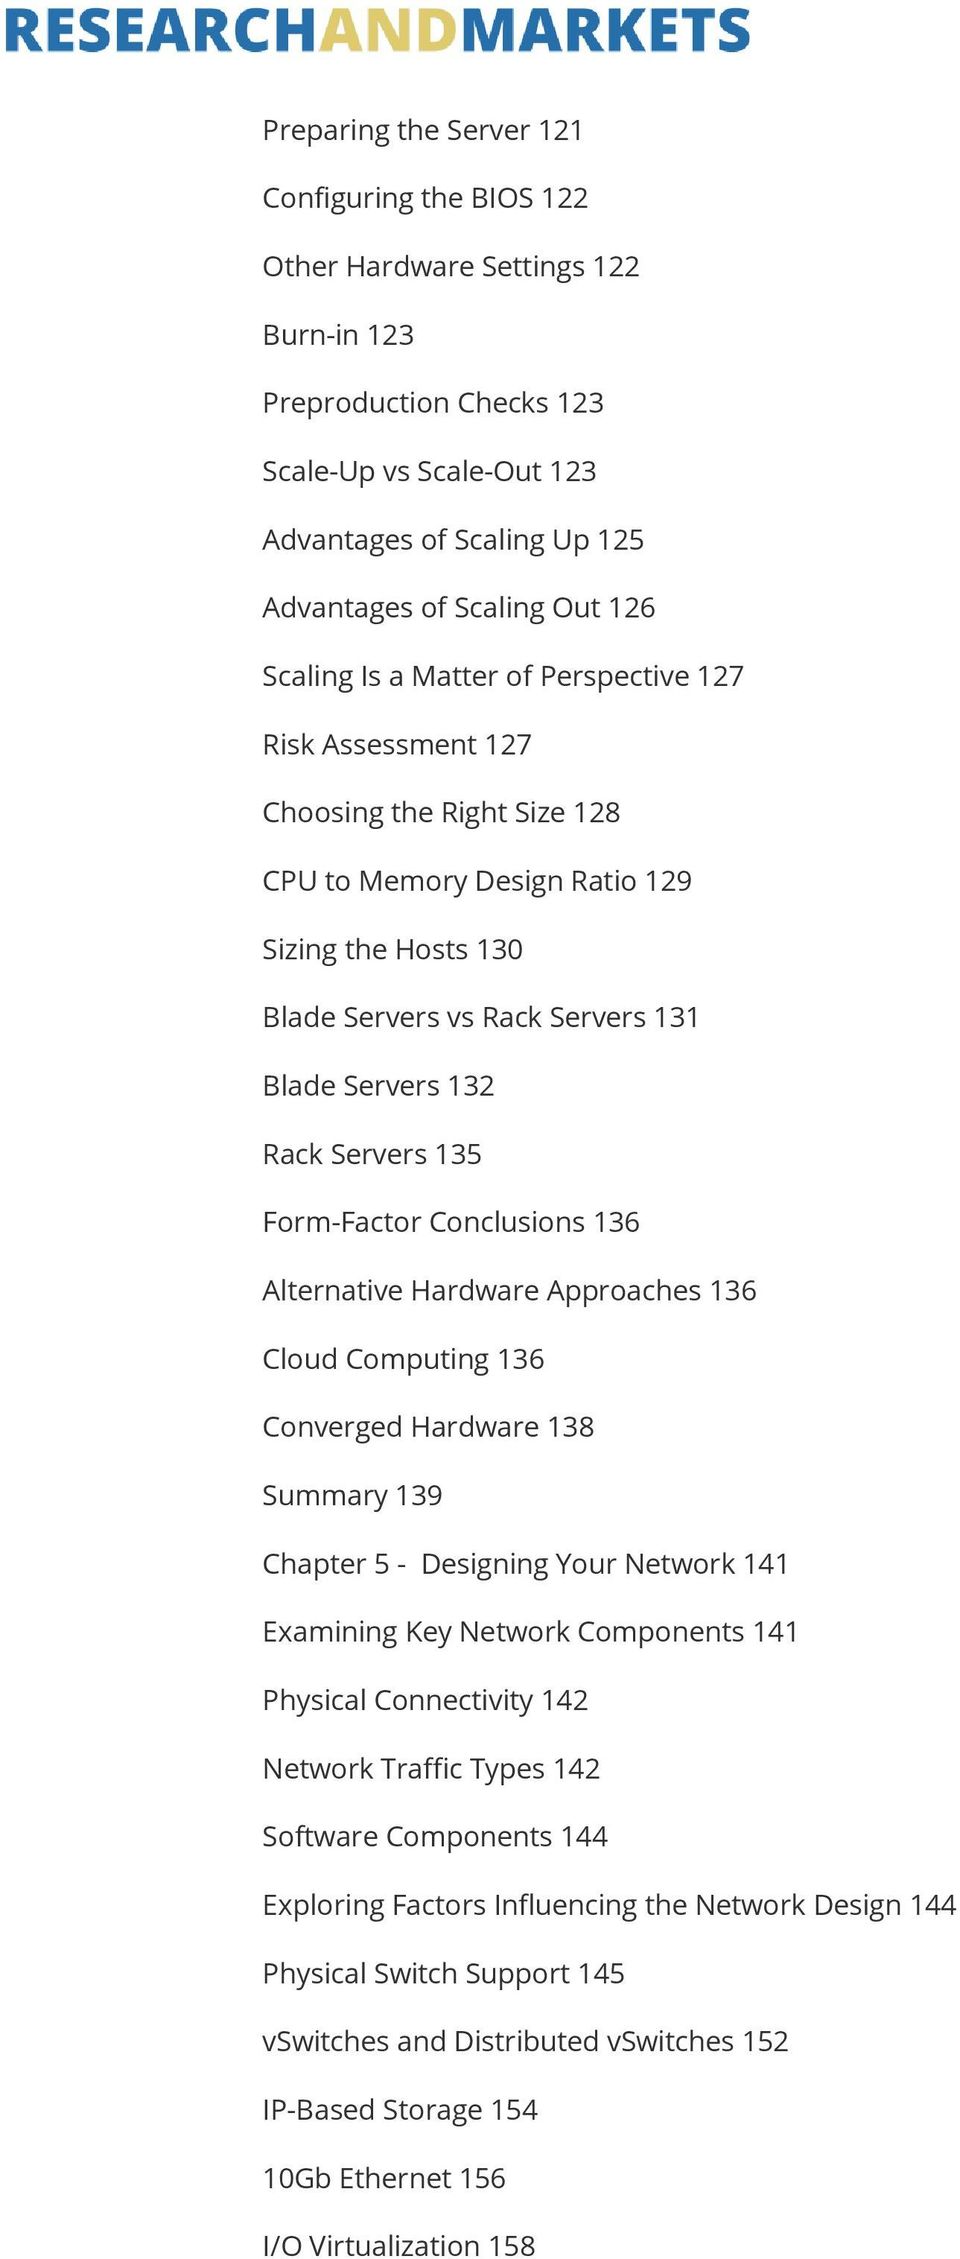 Servers 135 Form-Factor Conclusions 136 Alternative Hardware Approaches 136 Cloud Computing 136 Converged Hardware 138 Summary 139 Chapter 5 - Designing Your Network 141 Examining Key Network